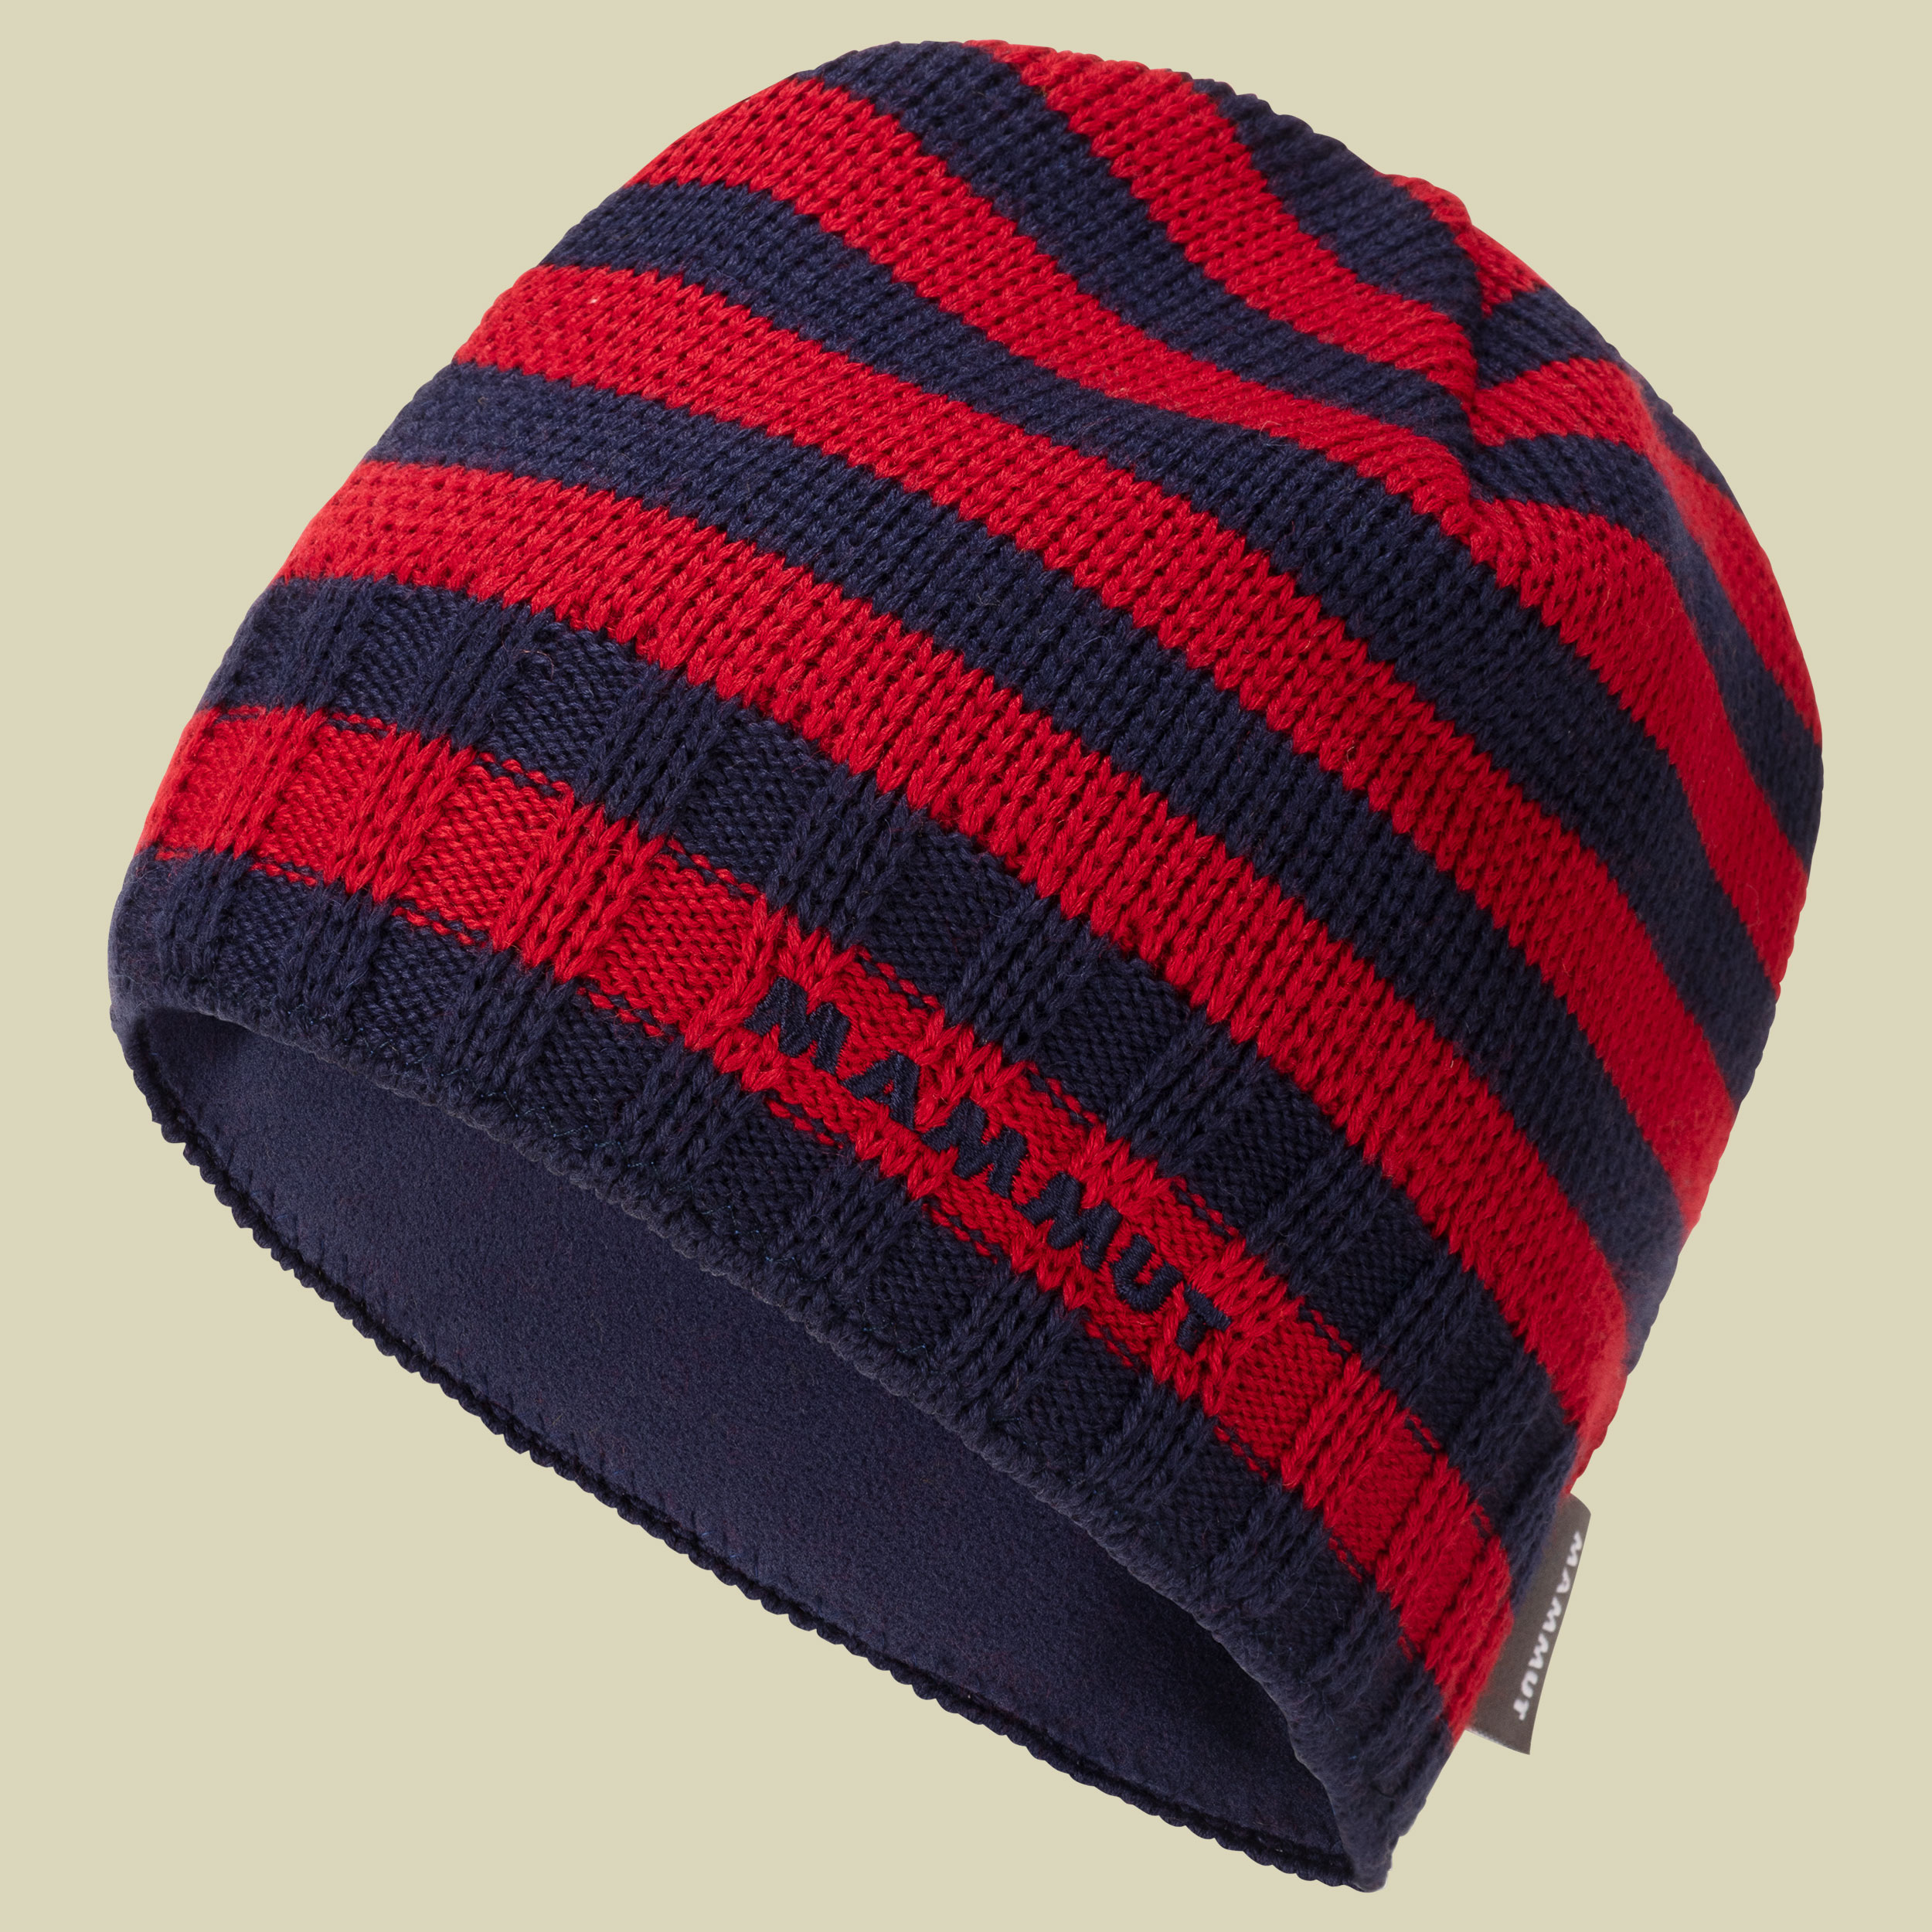 Passion Beanie Größe one size Farbe peacoat-scooter